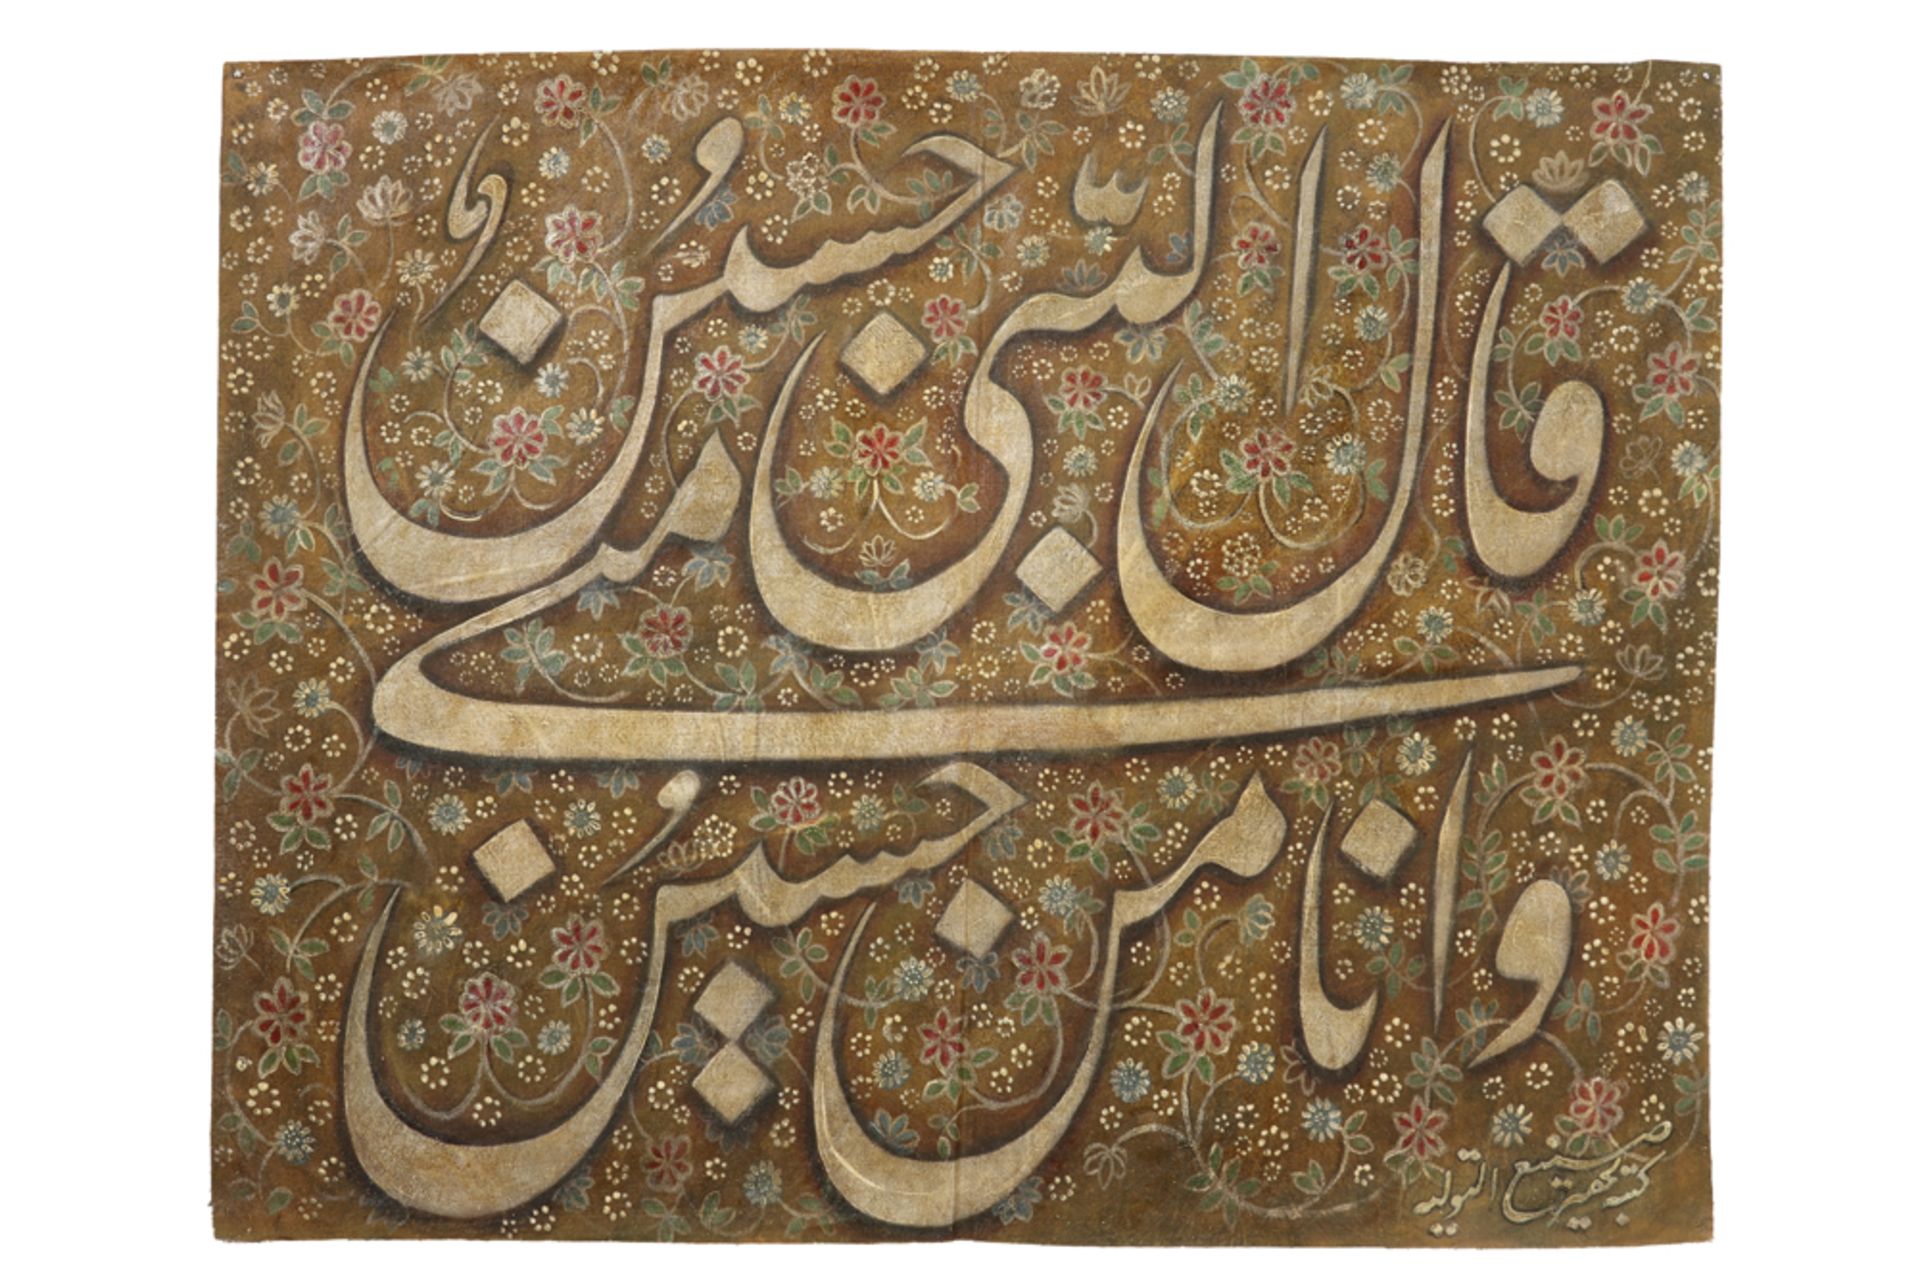 19th/20th Cent. Persian calligraphy with a scripture in Arabic on a bed of flowers || PERZIË - 19°/